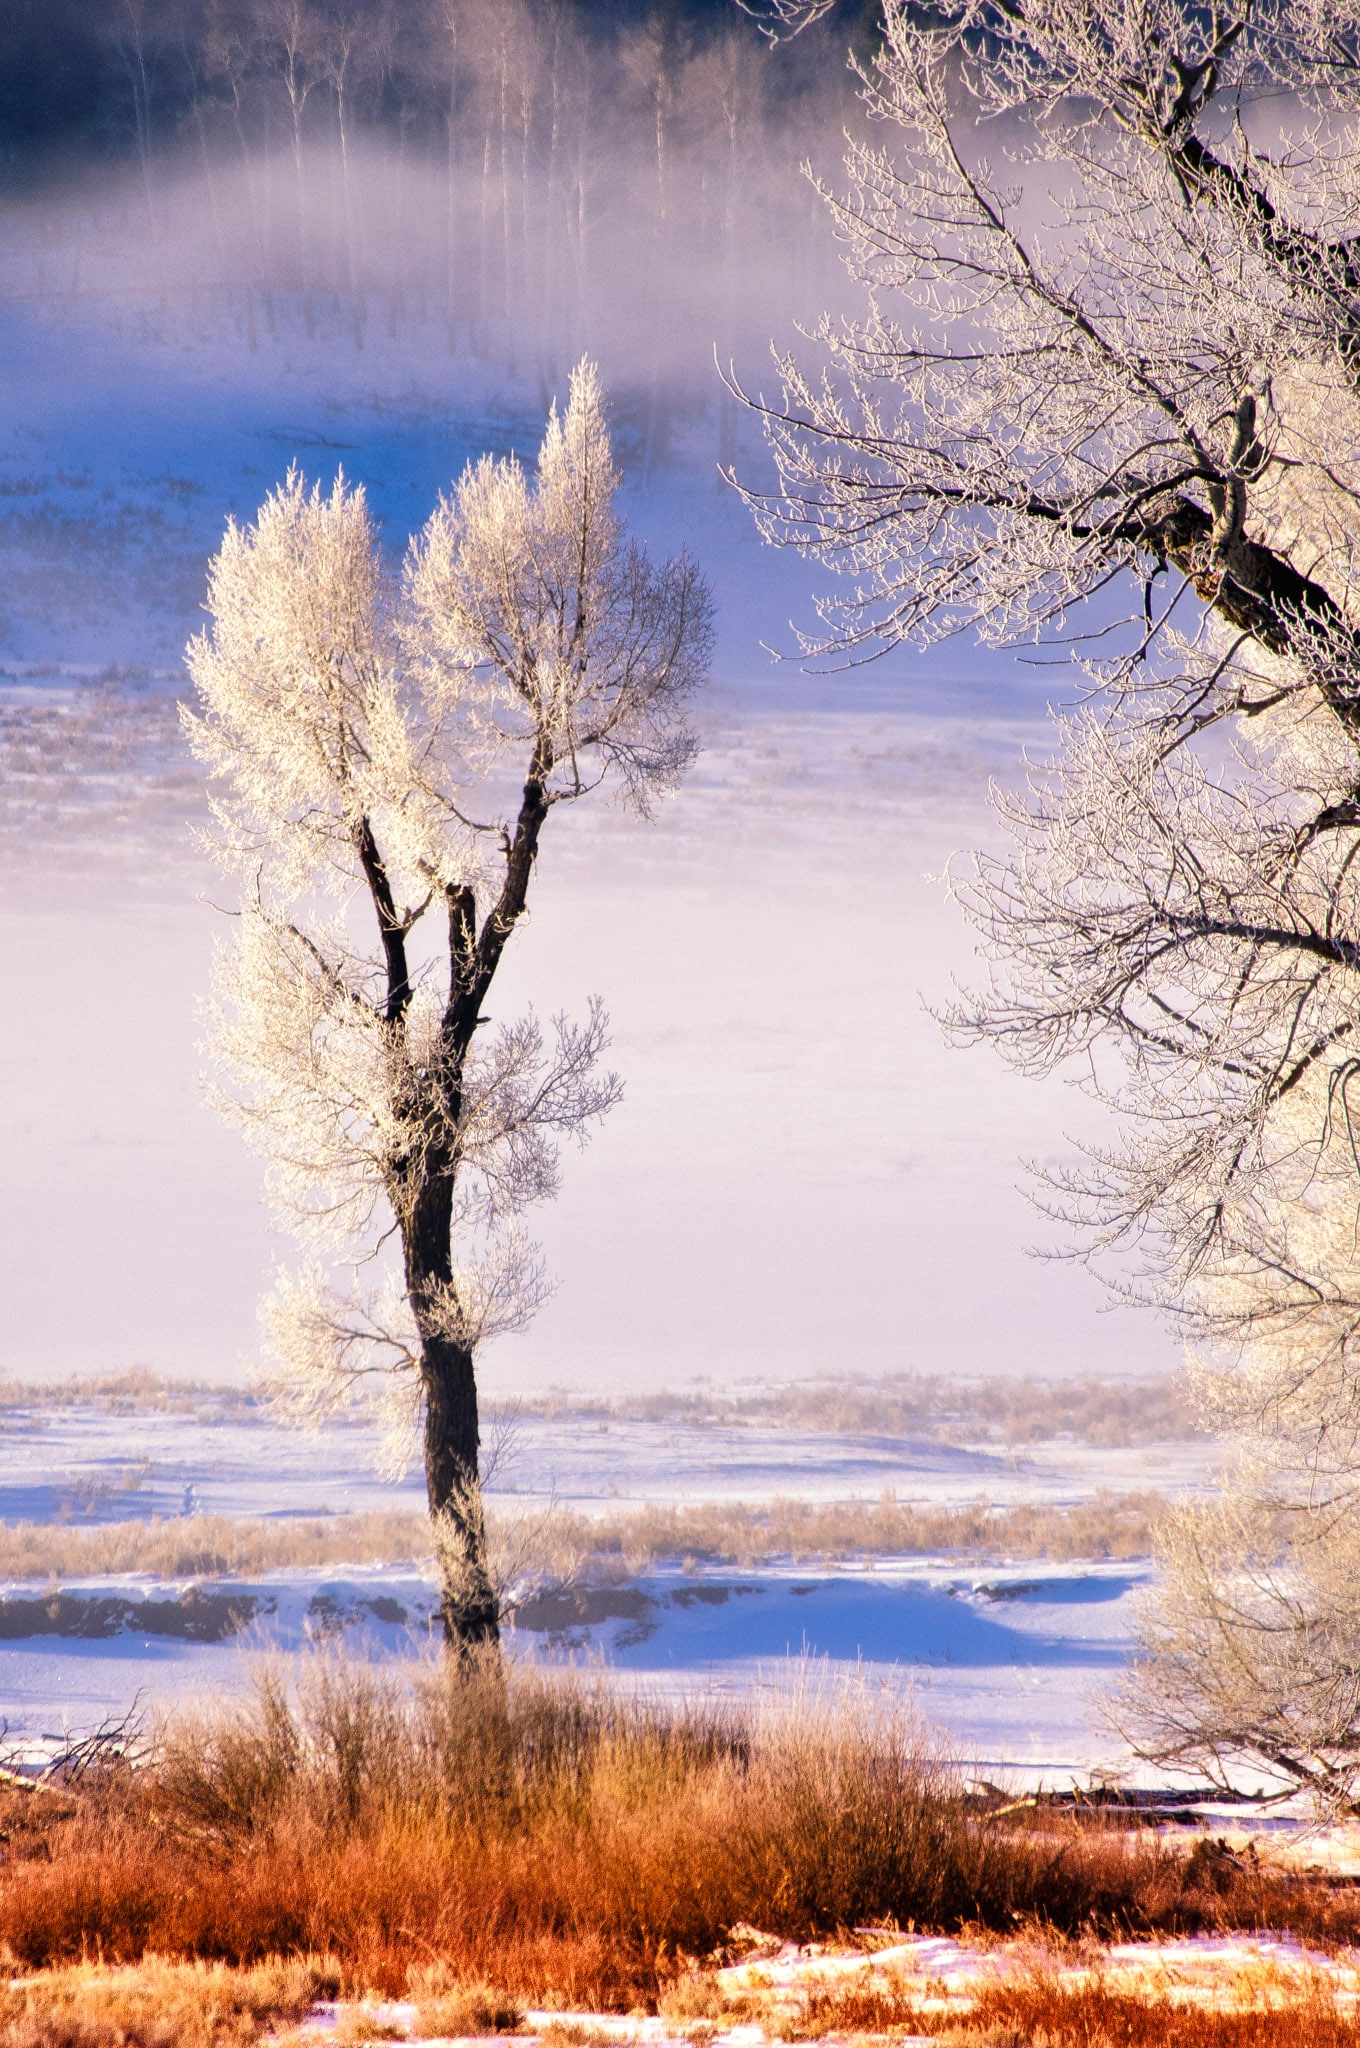 The first light of day brushes the icy brances of trees in the Lamar Valley of Yellowstone National Park.